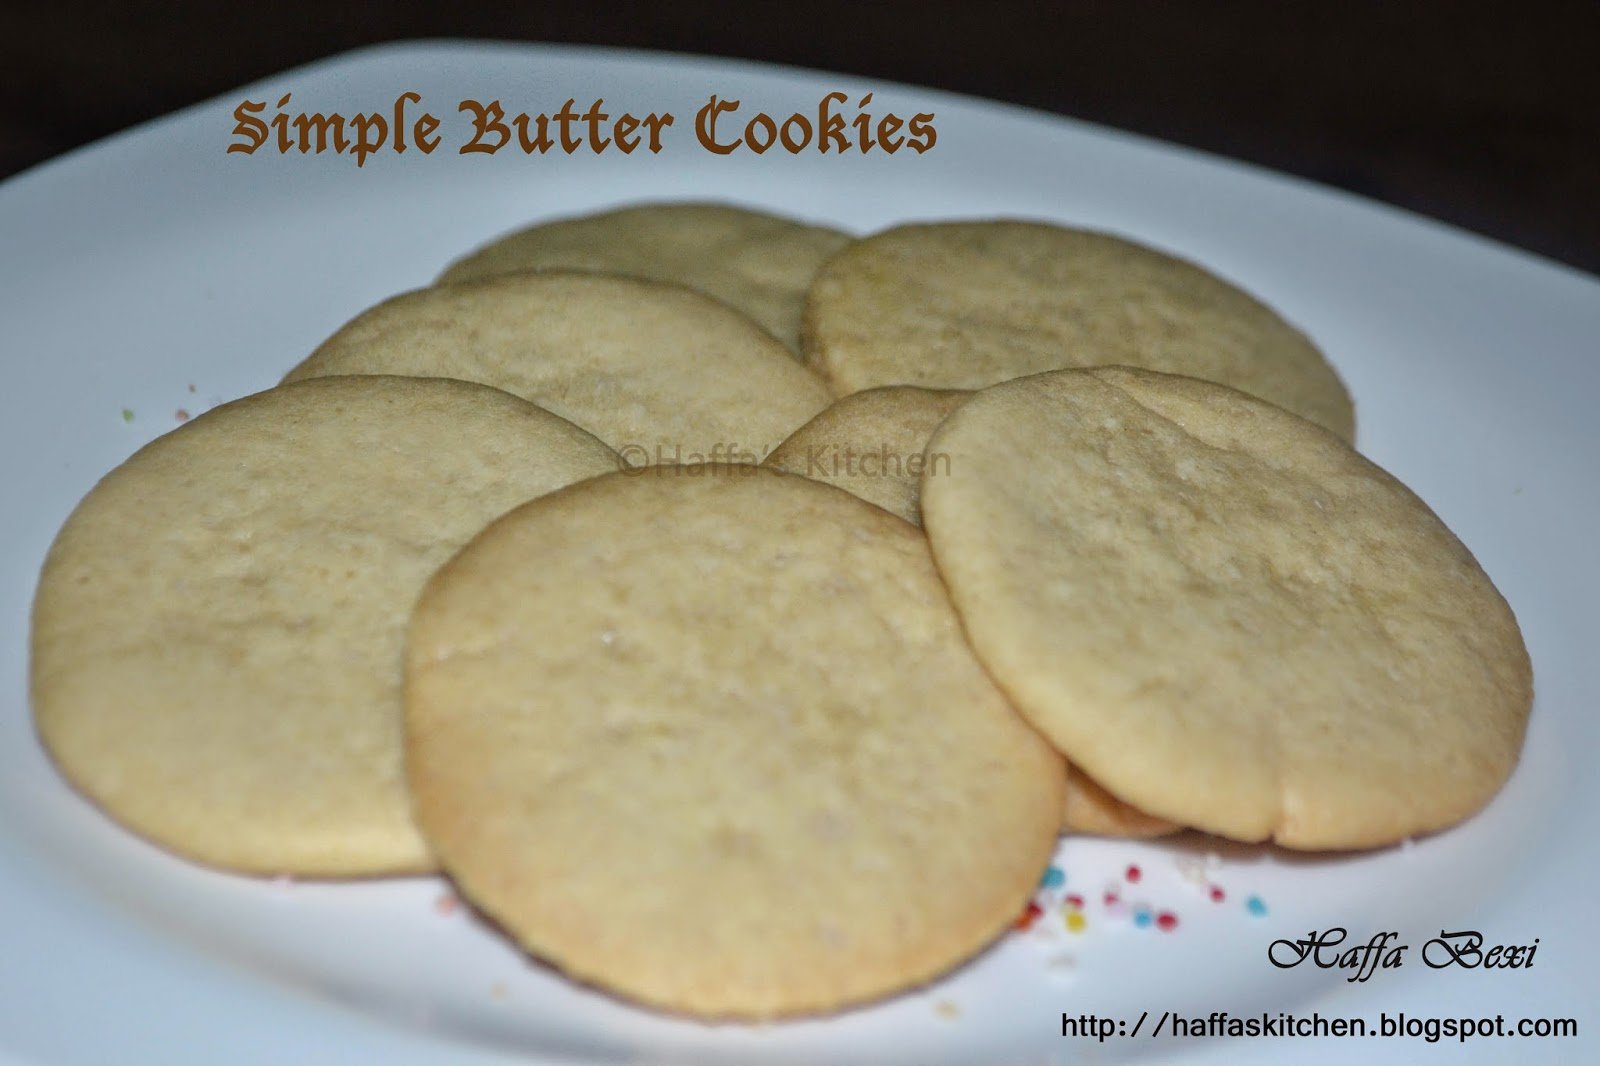 Simple Butter Cookies